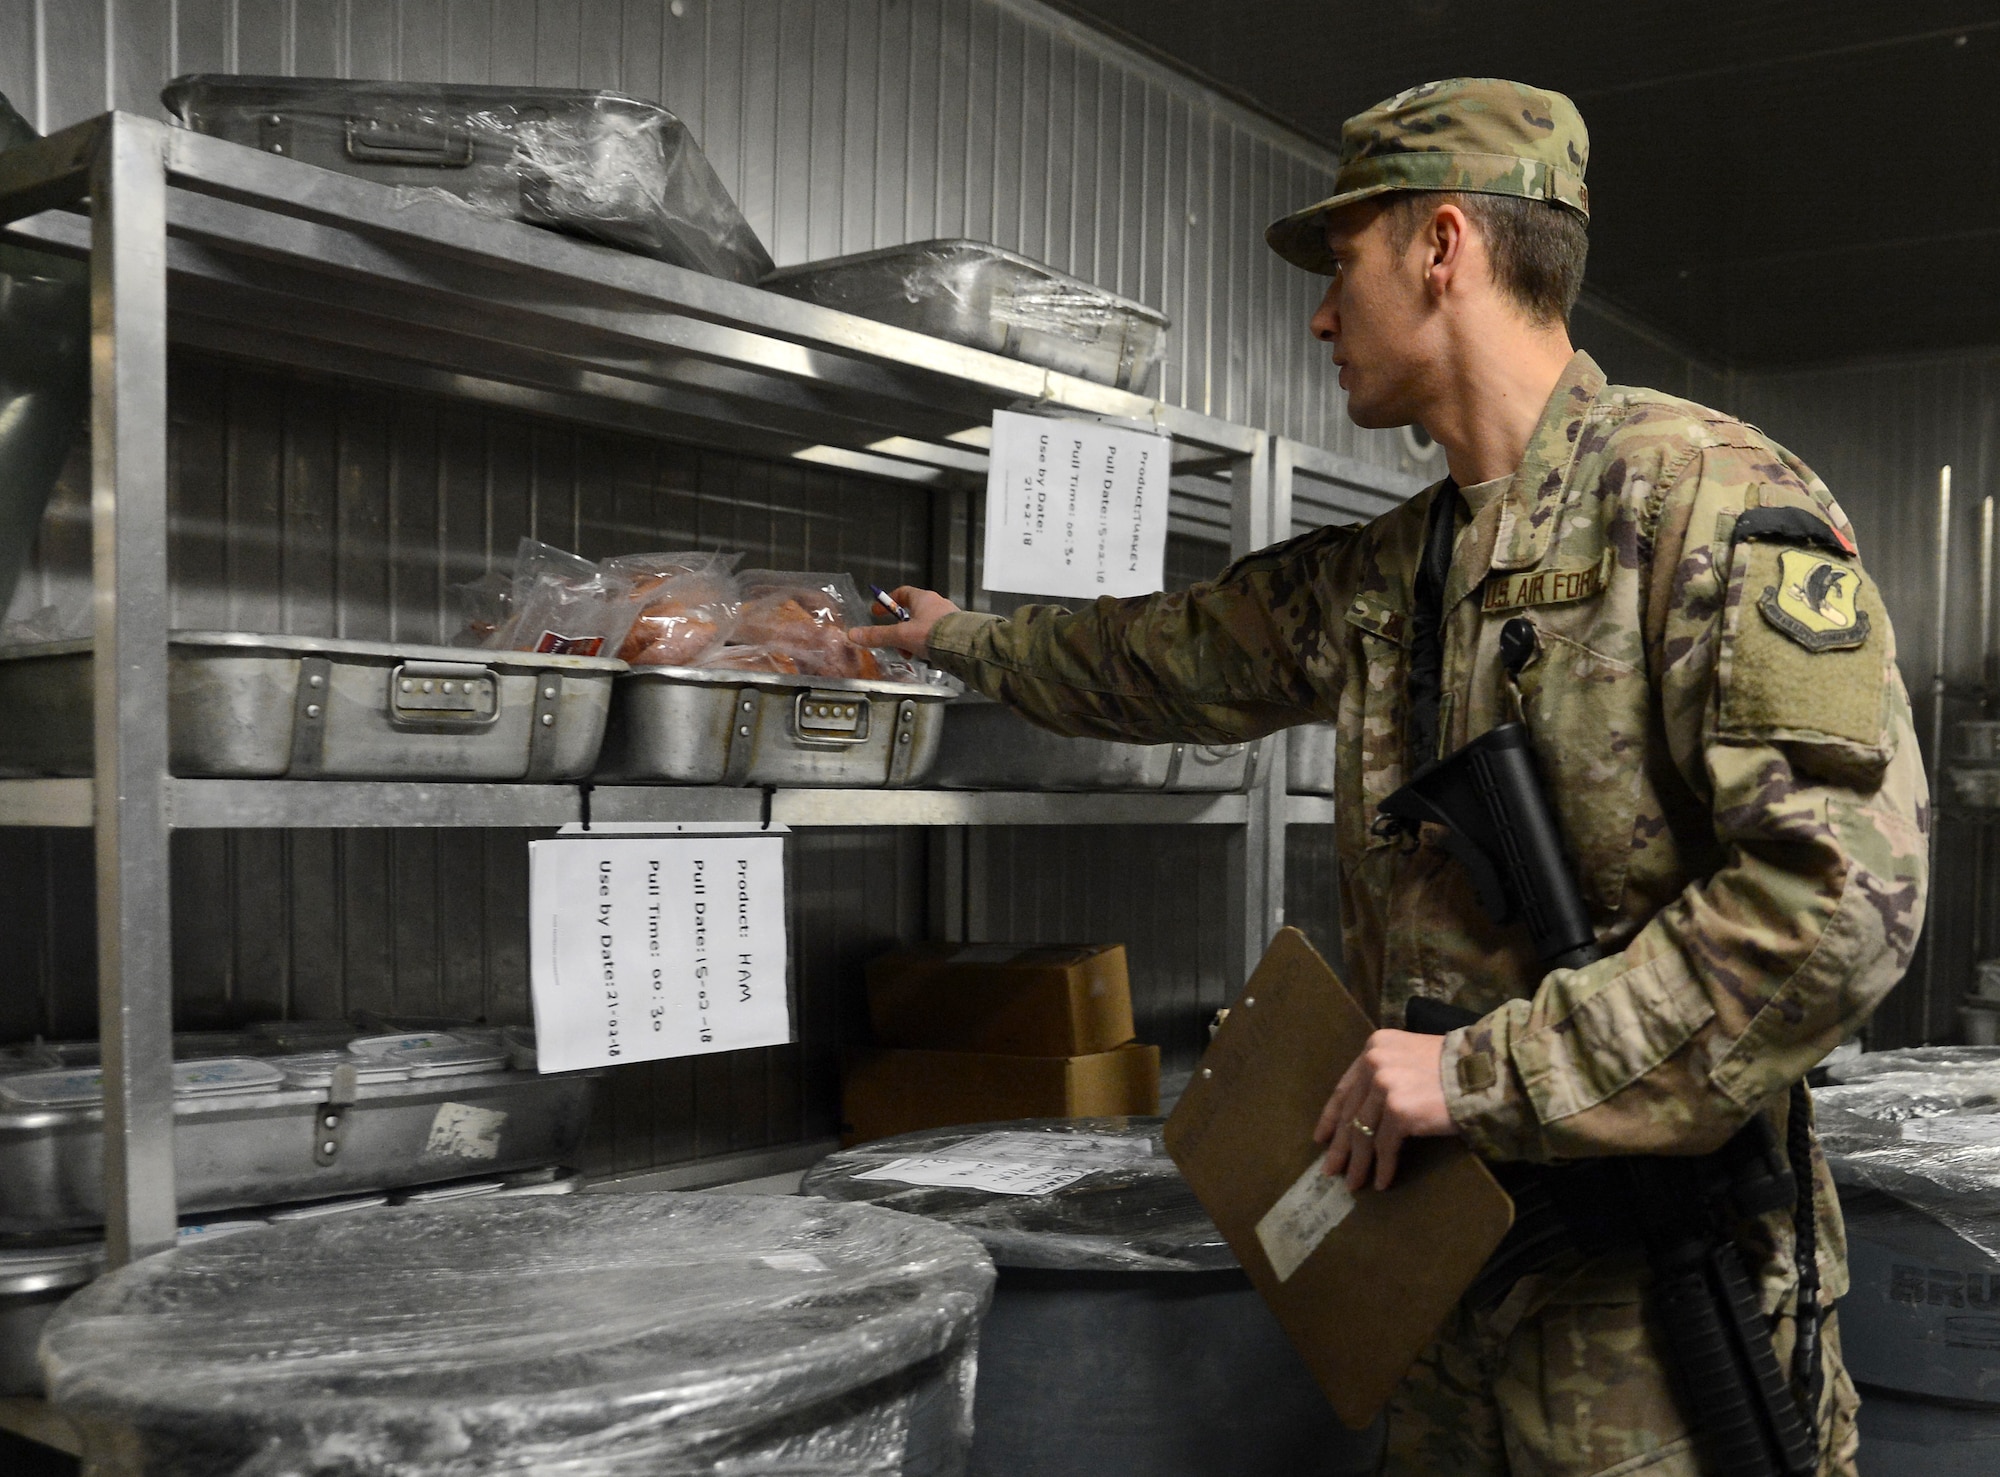 Staff Sgt. Nikola Bozic, 455th Expeditionary Medical Group public health technician, checks for expired food during his routine food inspection of the Grady dining facility Feb. 15, 2018 at Bagram Airfield, Afghanistan.